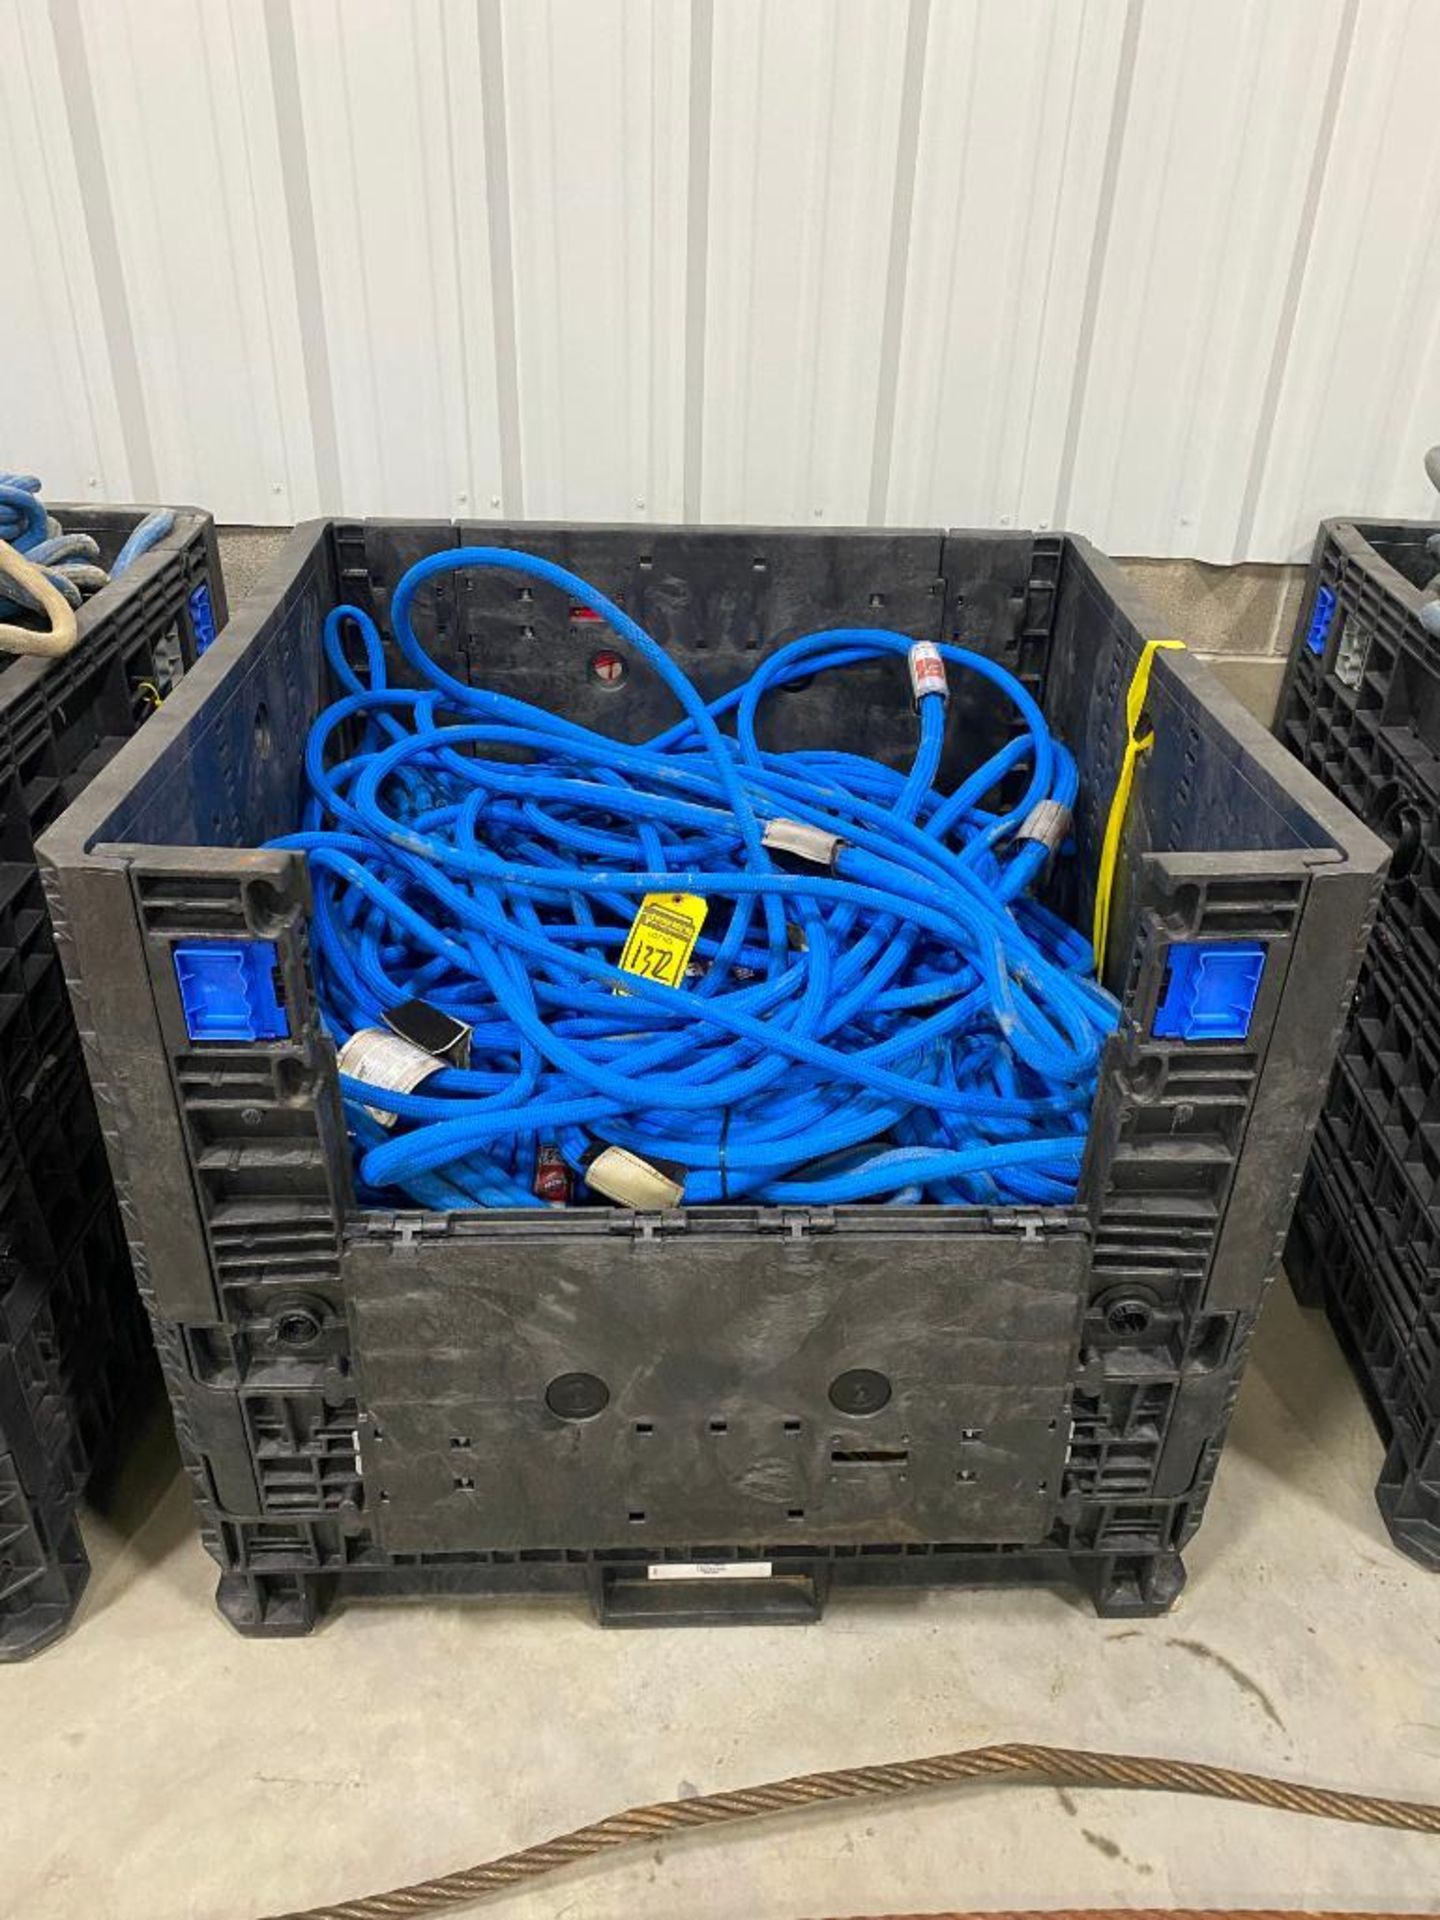 Crate of (NEW) Hammer Head Slings, 1" Dia., 45,000 Basket, Assorted Lengths, 5'-30' - Image 2 of 6